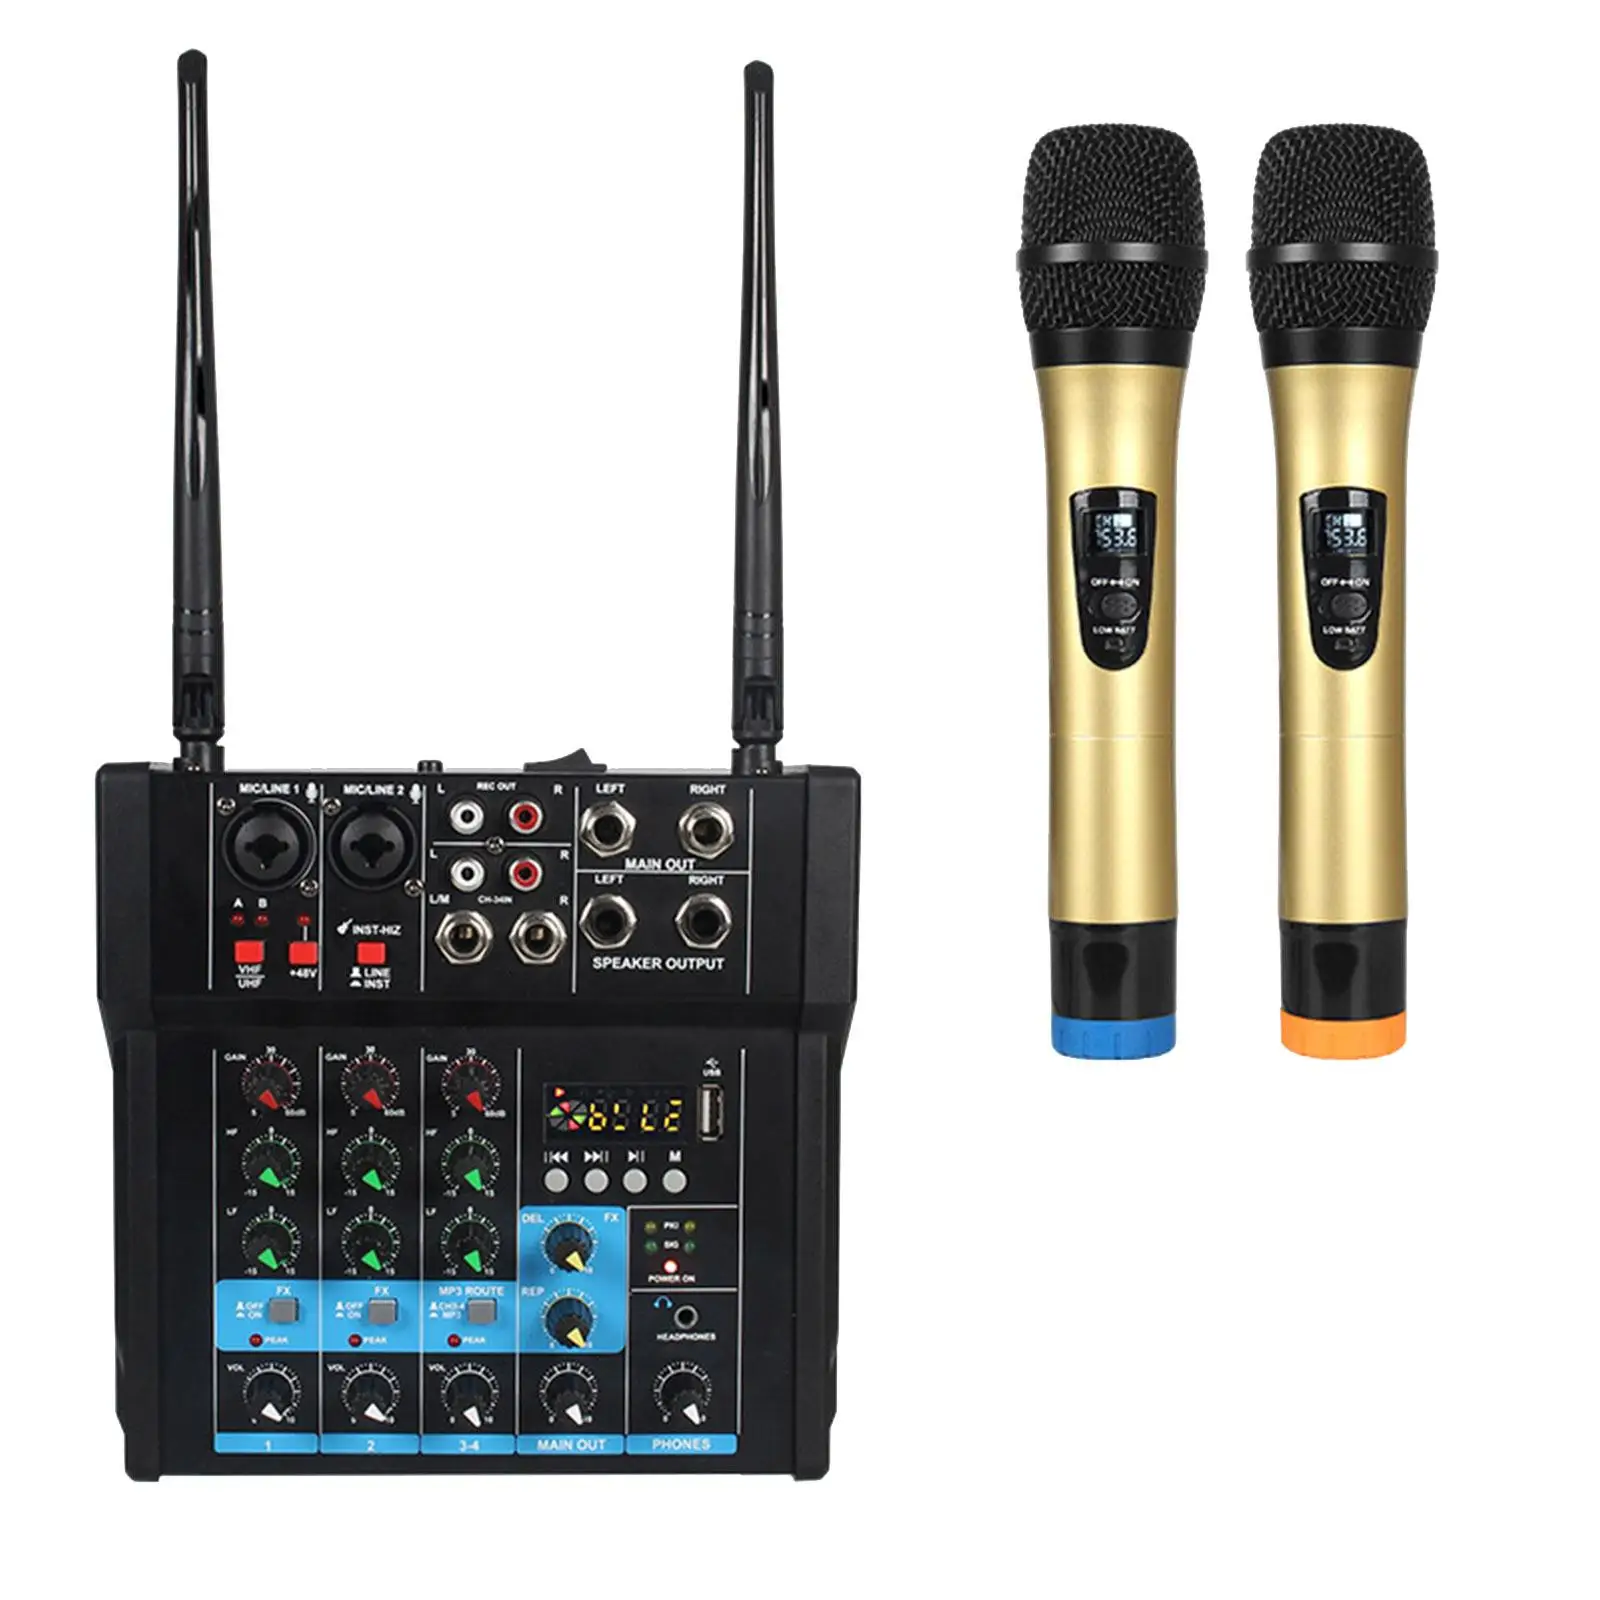 Audio Mixer Amplifier with Dual Wireless Mic 4 Channel Portable Sound Mixer for DJ Mixing Karaoke Recording Live Streaming